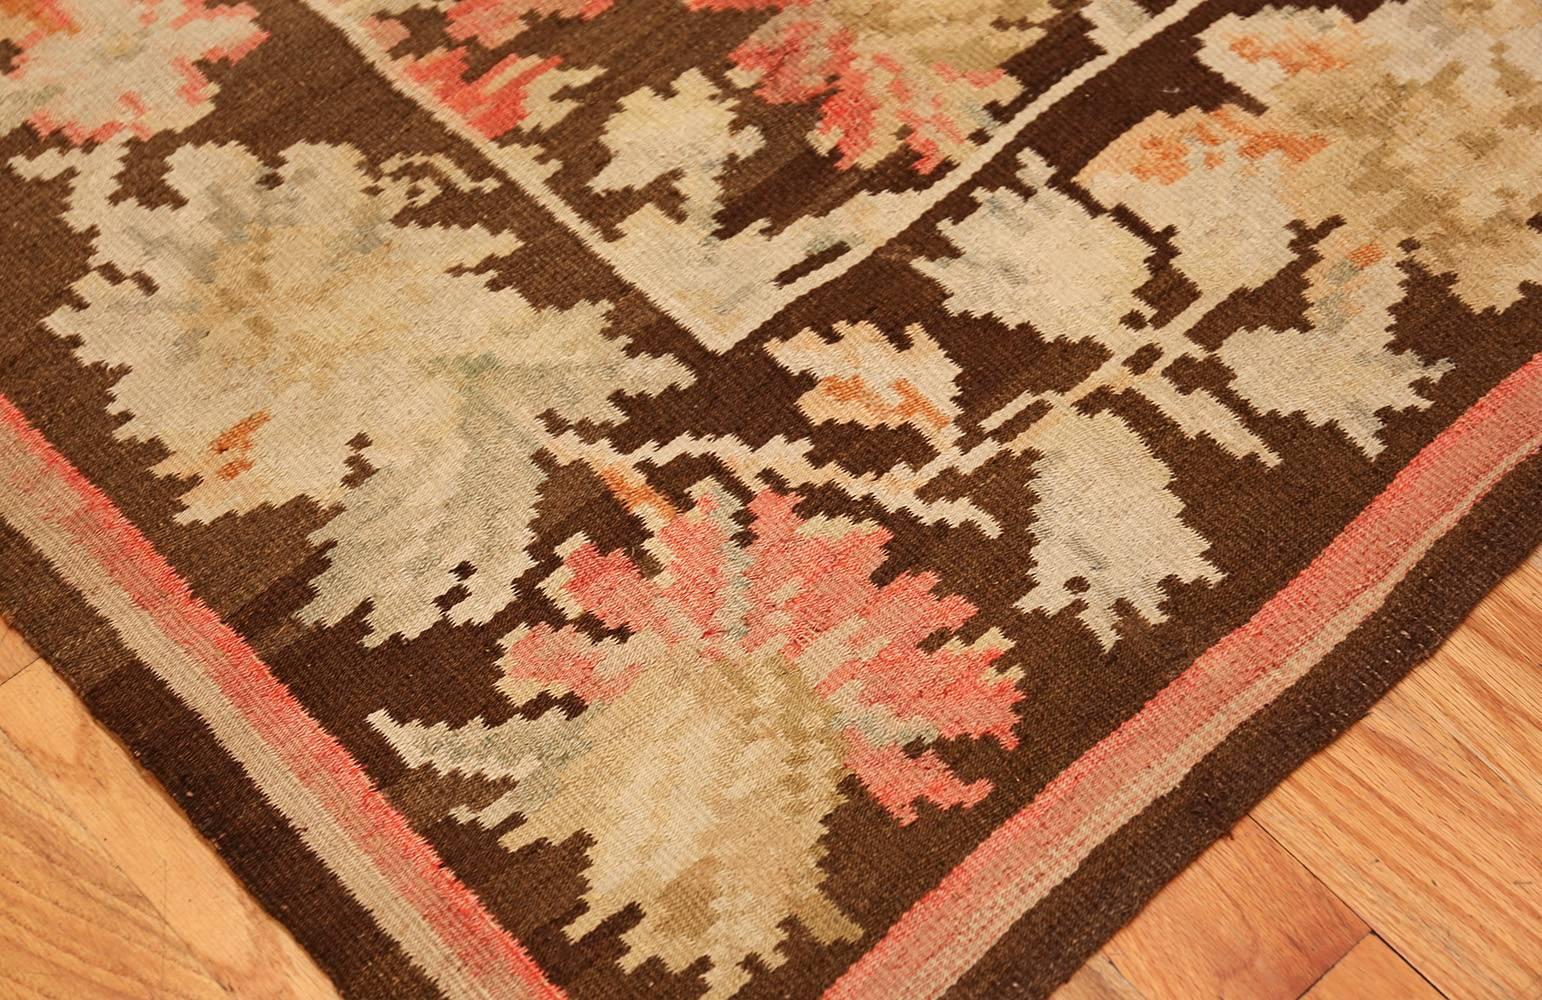 Wool Nazmiyal Collection Antique Romanian Bessarabian Rug. 9 ft 8 in x 10 ft 8 in